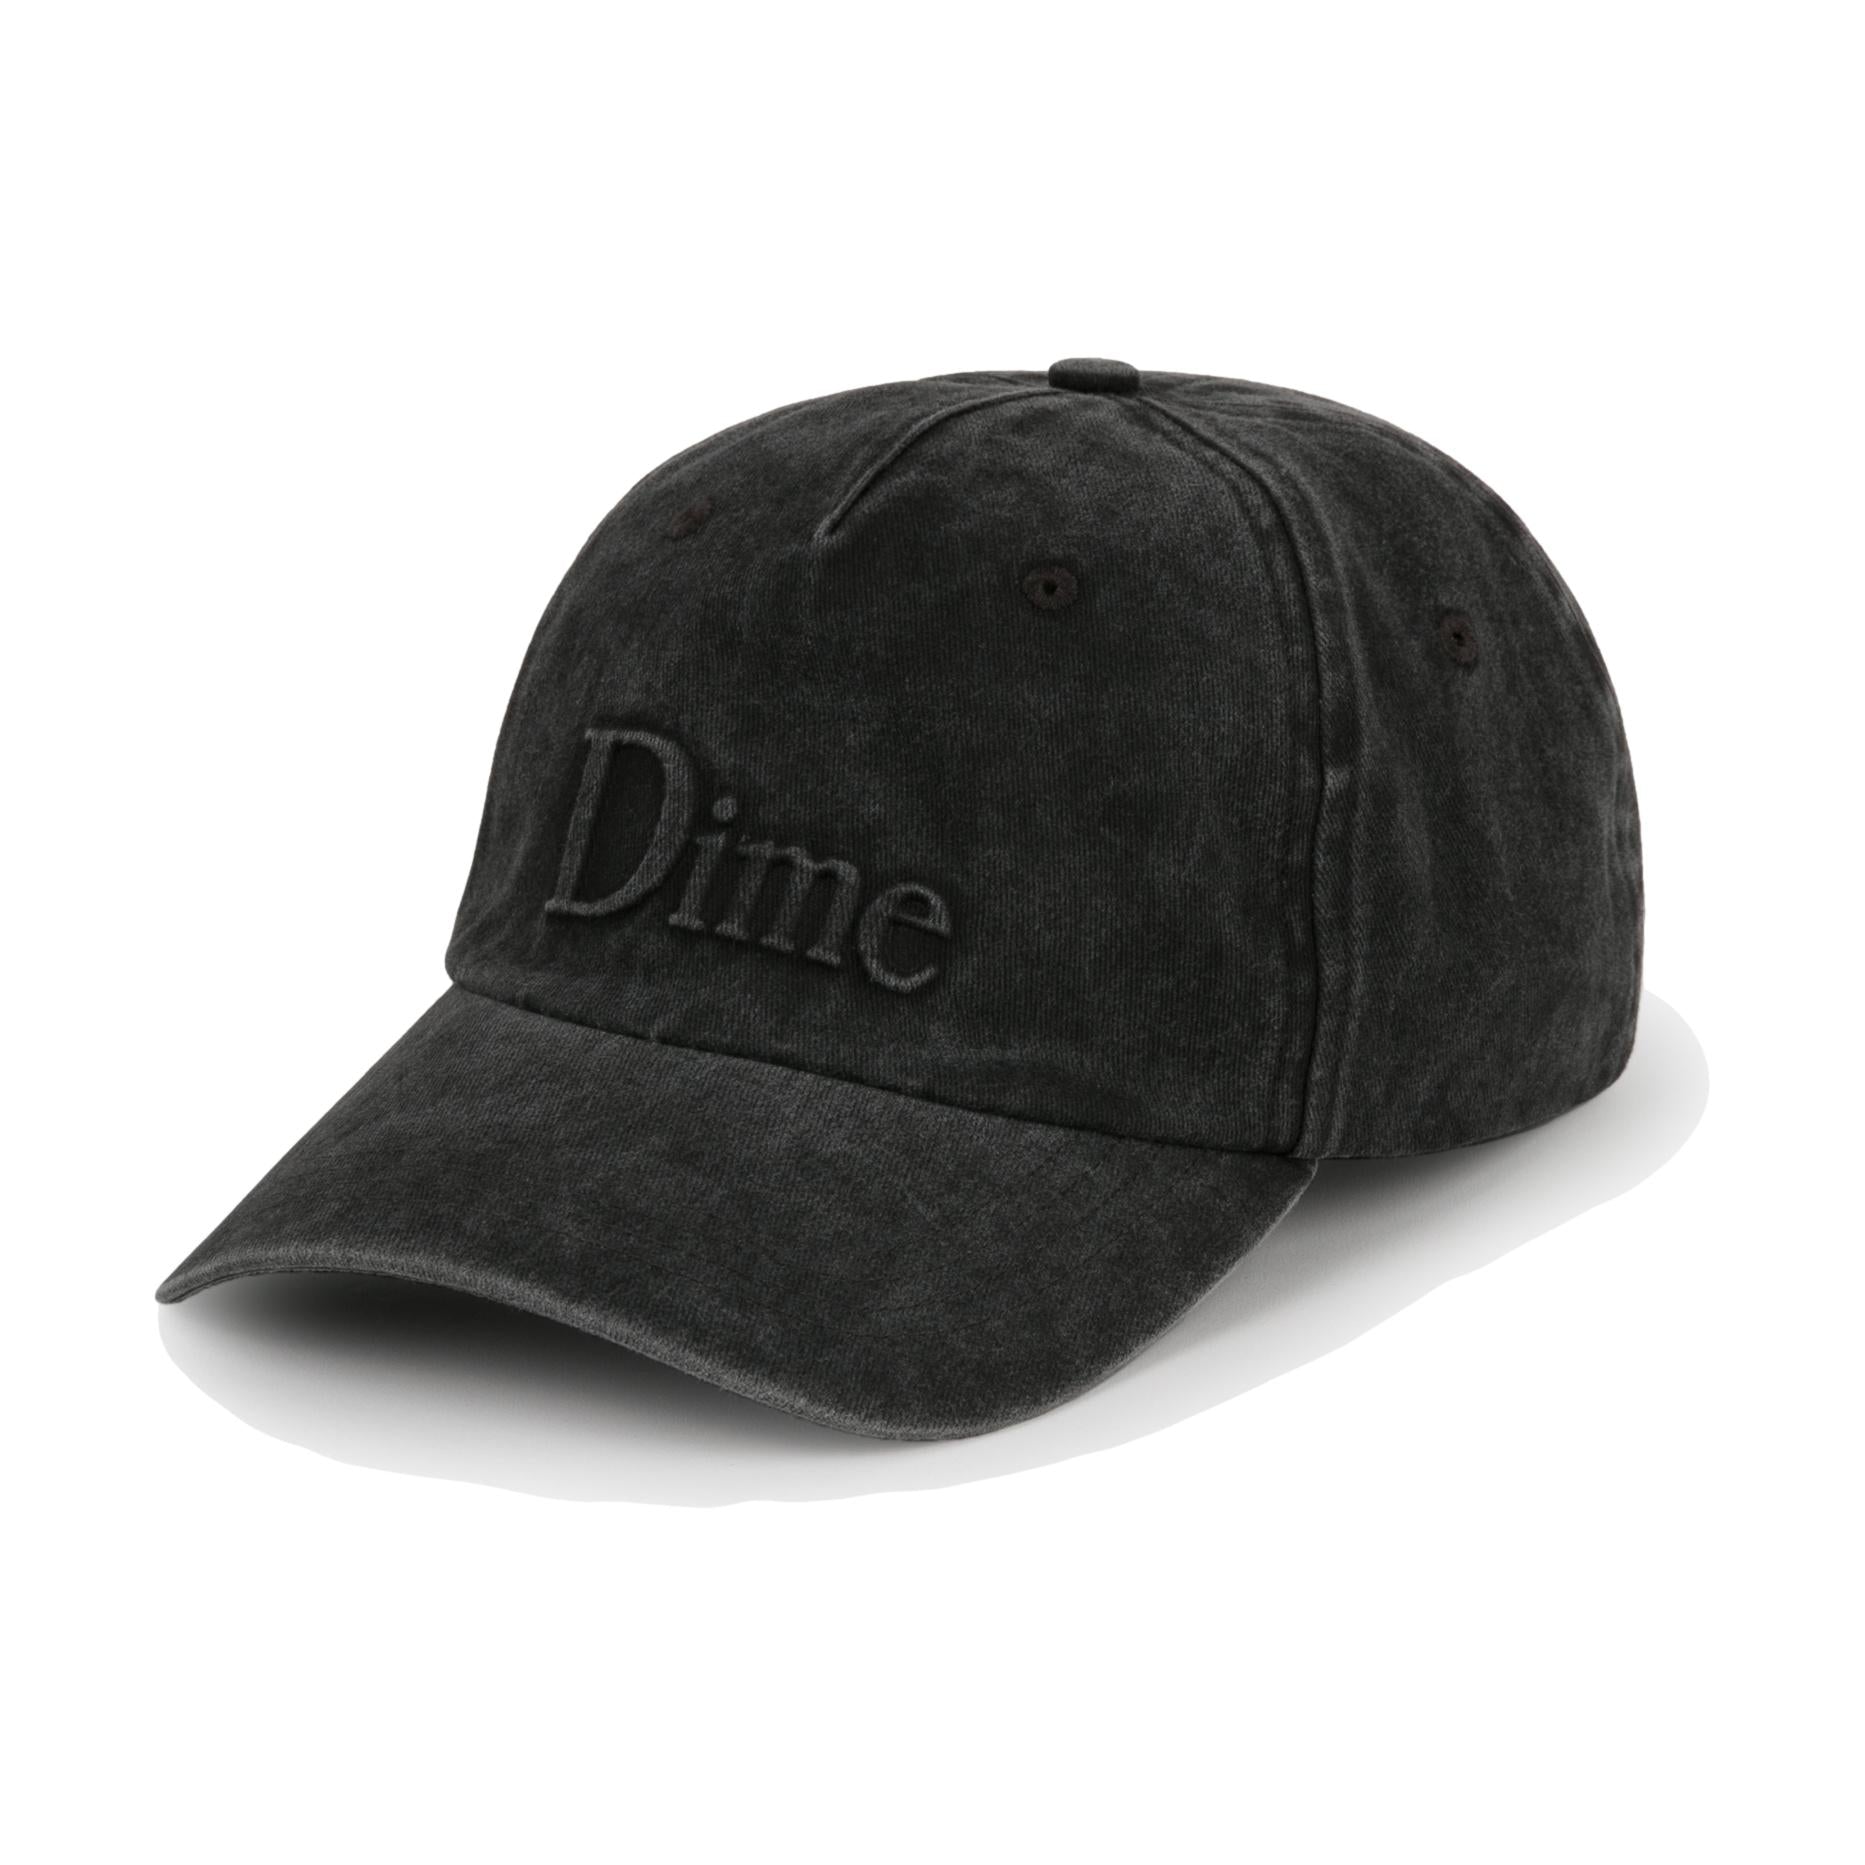 Dime Classic Embossed Uniform Cap Charcoal Washed - Venue Skateboards